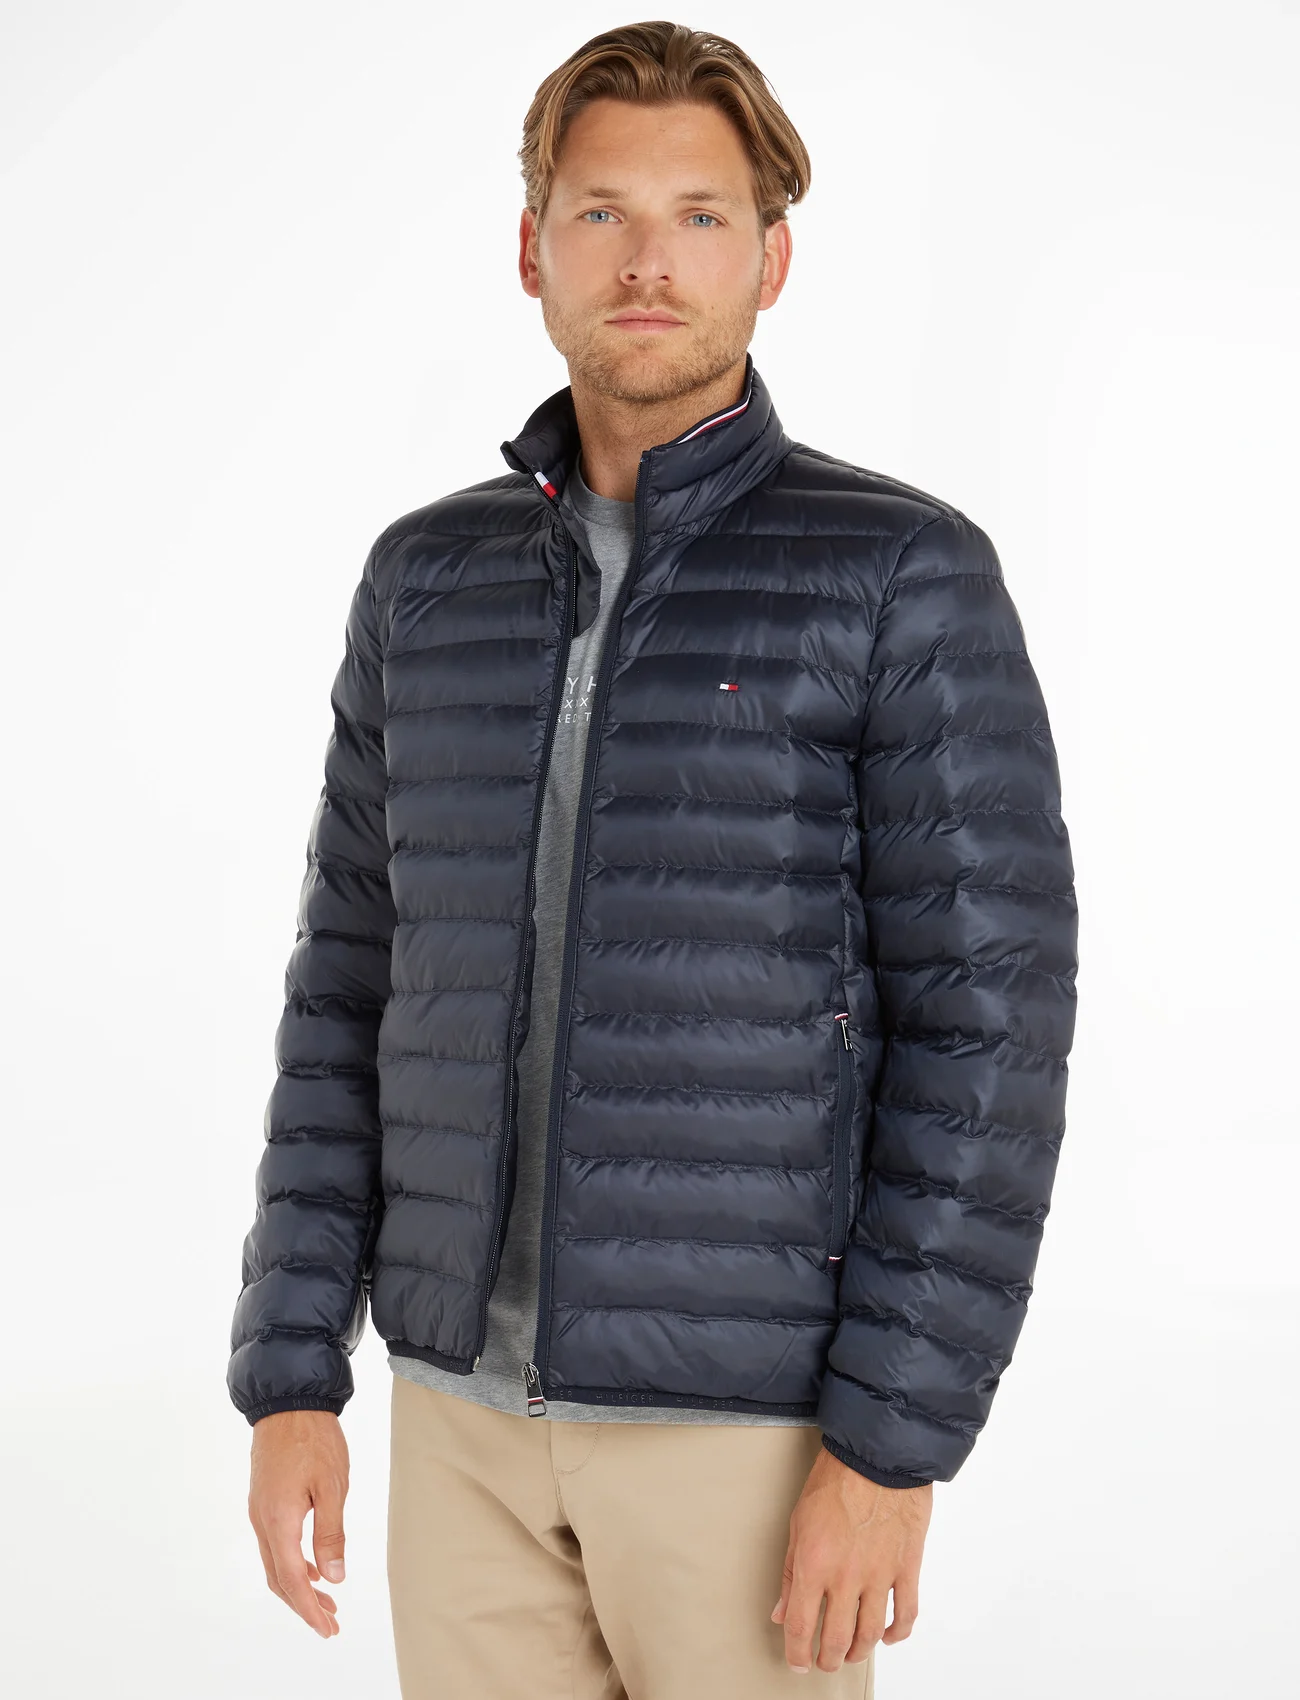 Tommy Hilfiger - CORE PACKABLE RECYCLED JACKET - down jackets - desert sky - 0